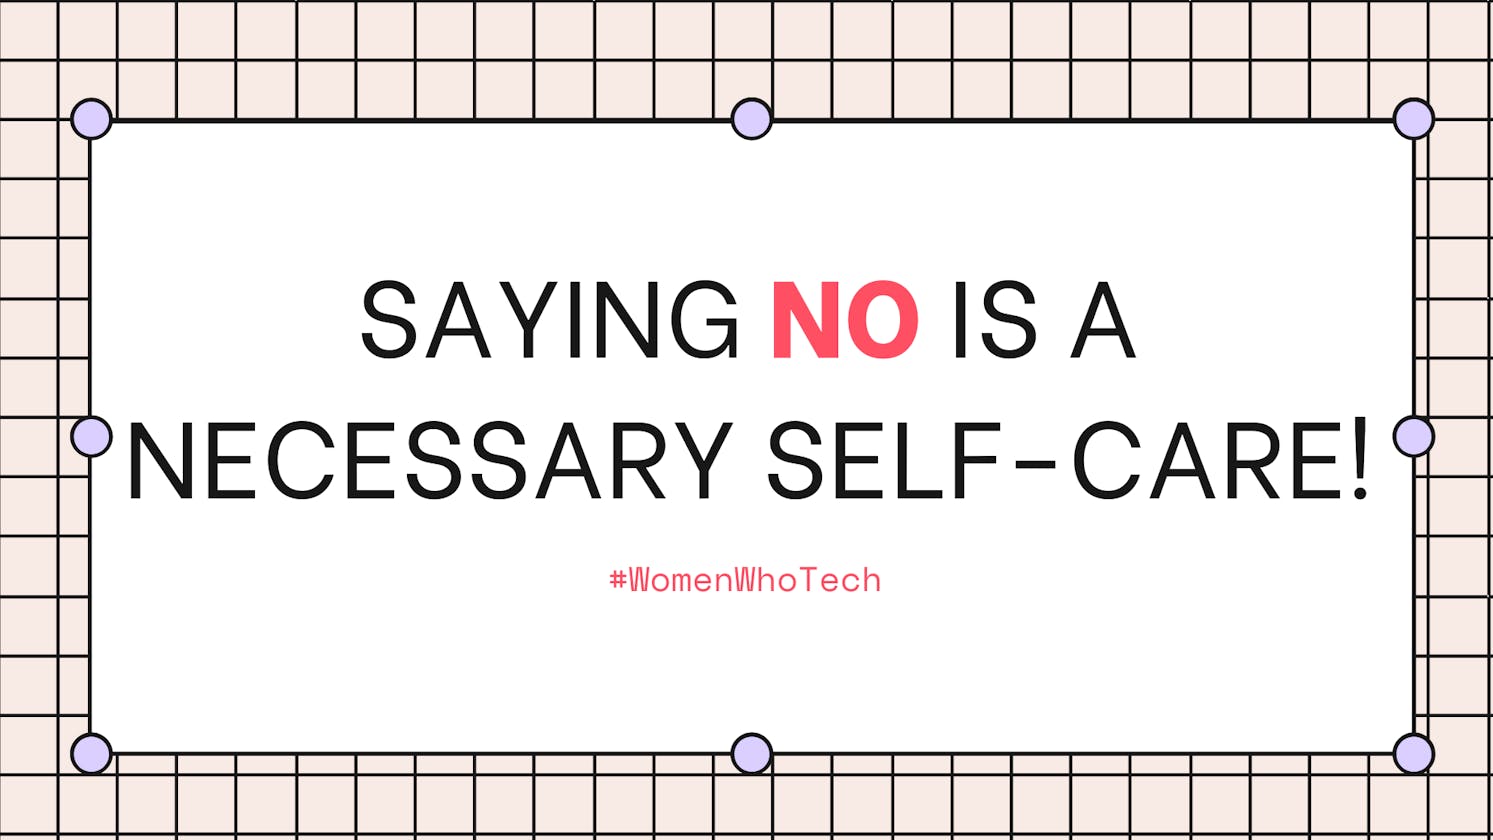 Saying NO is a necessary self-care!